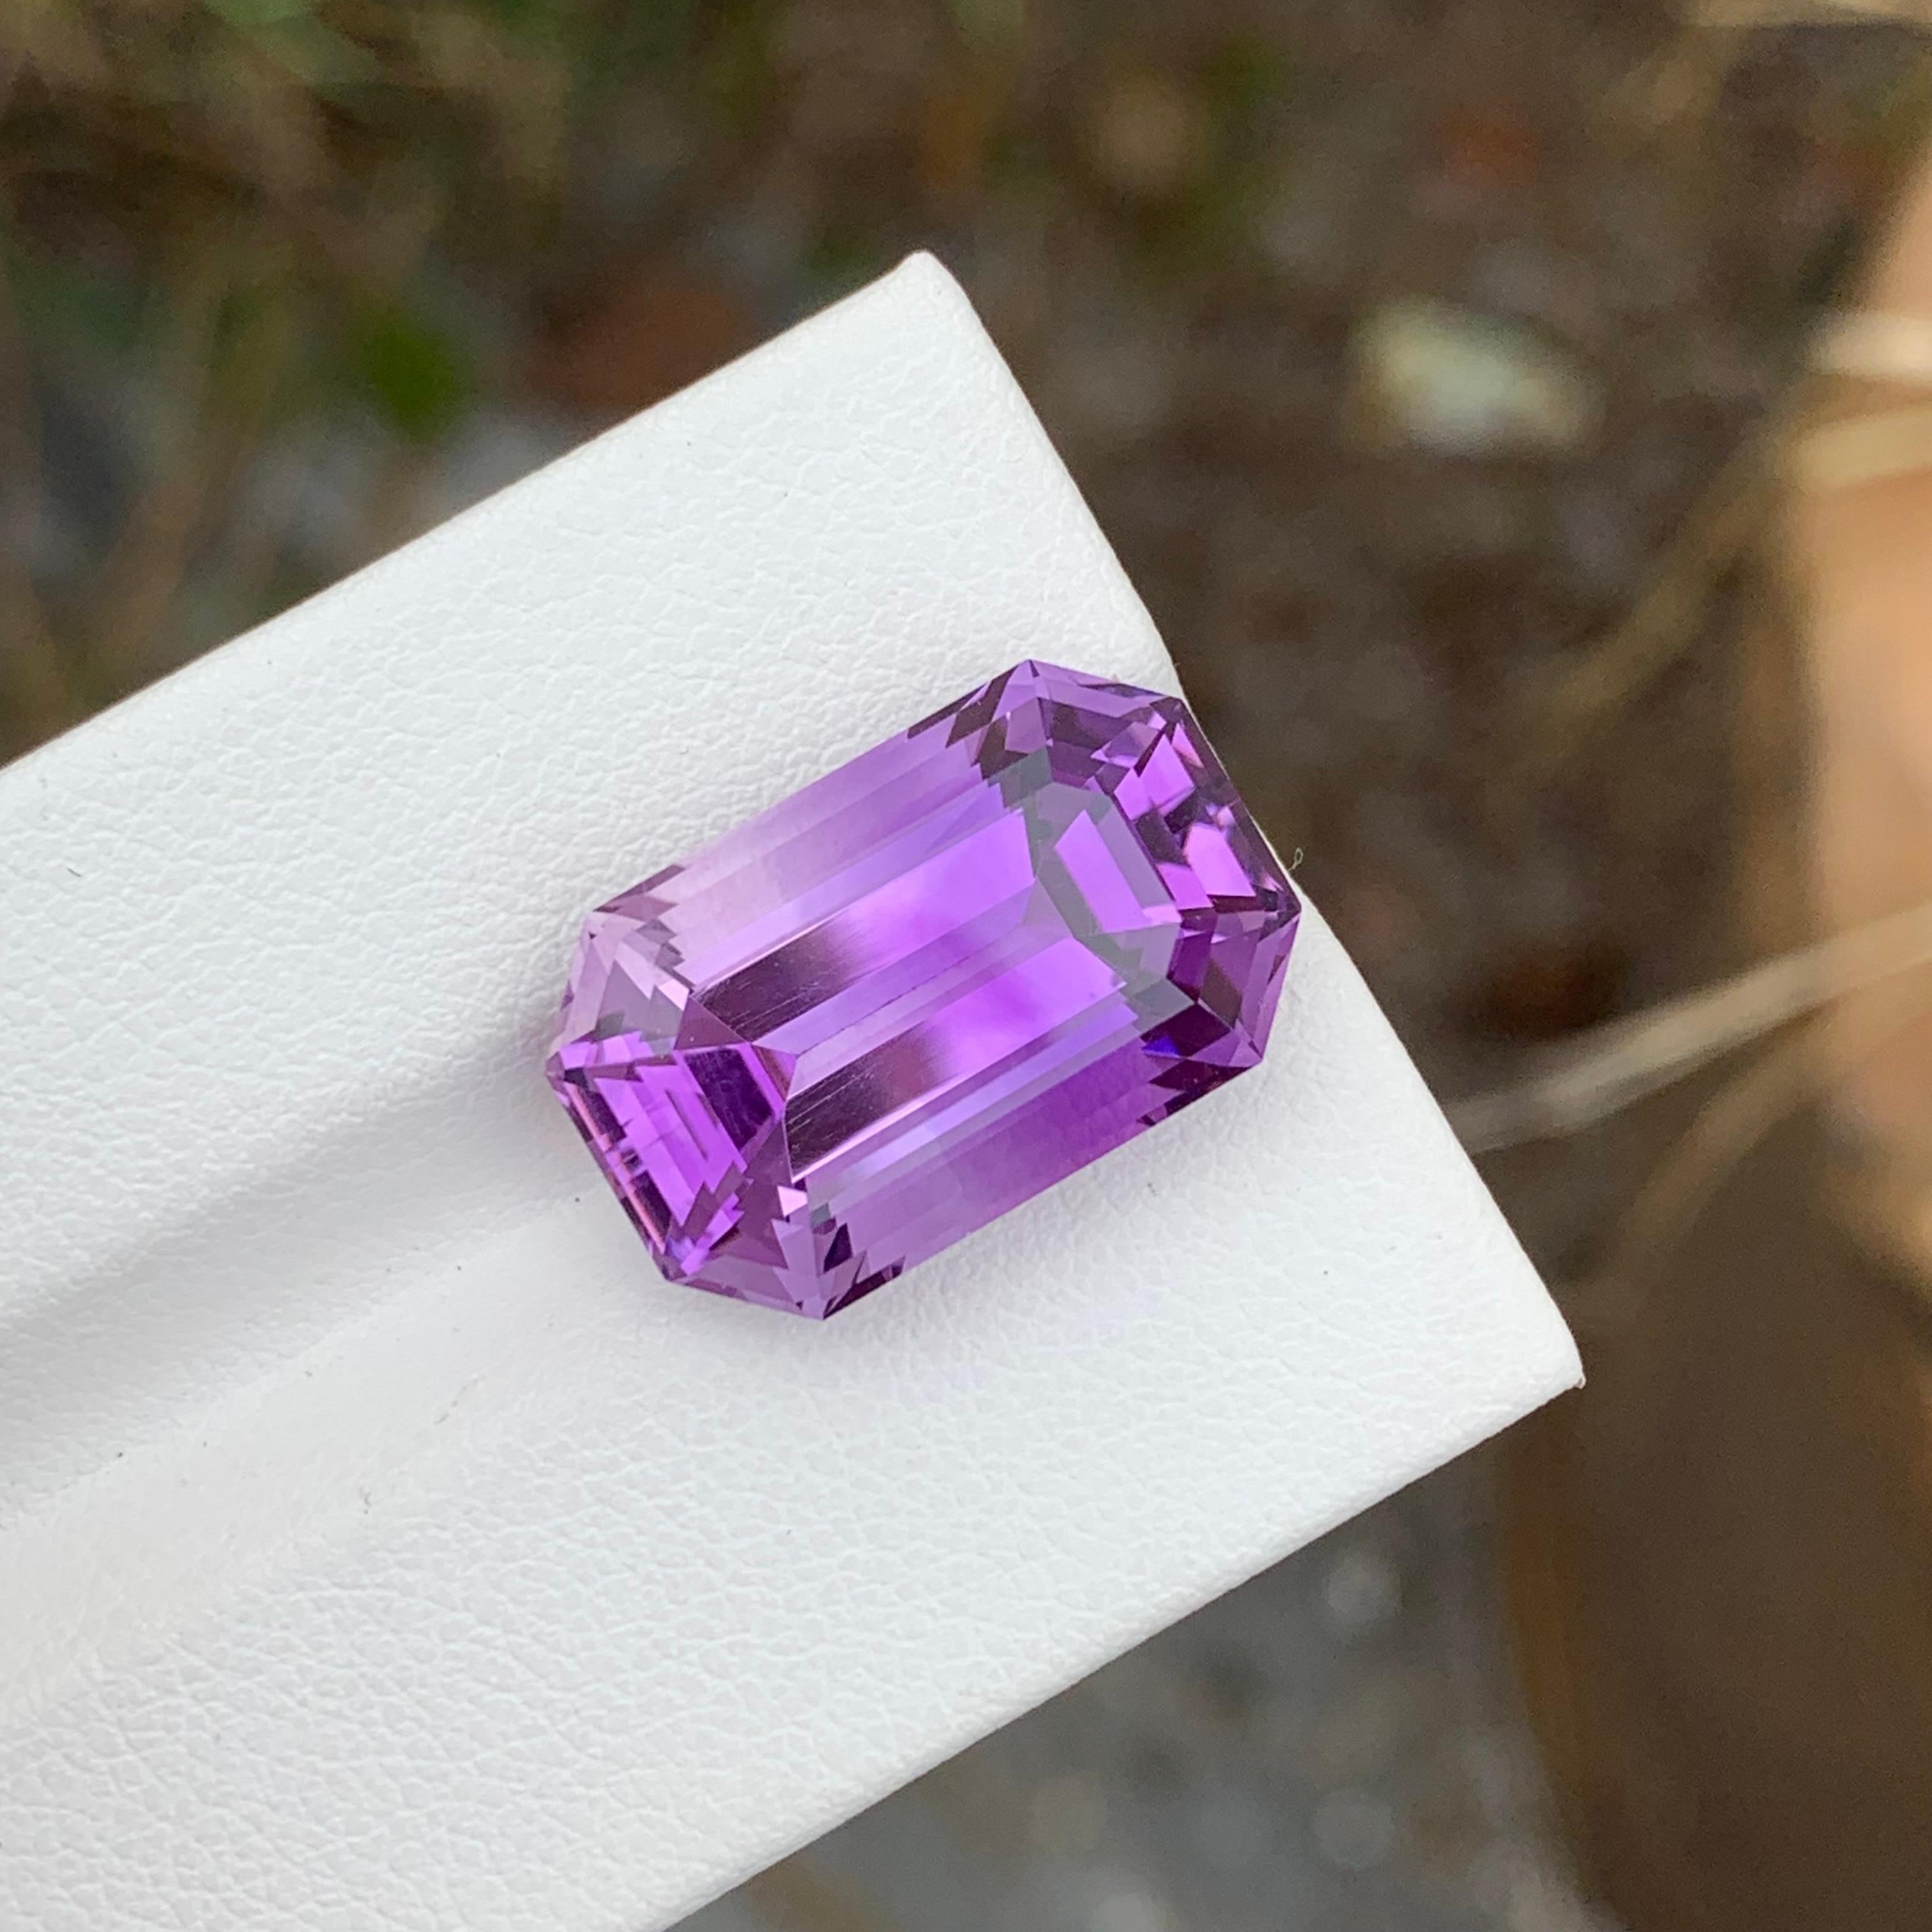 Loose Amethyst
Weight: 14.20 Carats
Dimension: 18.5 x 11.7 x 9.6 Mm
Colour: Purple
Origin: Brazil
Treatment: Non
Certificate: On Demand
Shape: Octagon 

Amethyst, a stunning variety of quartz known for its mesmerizing purple hue, has captivated